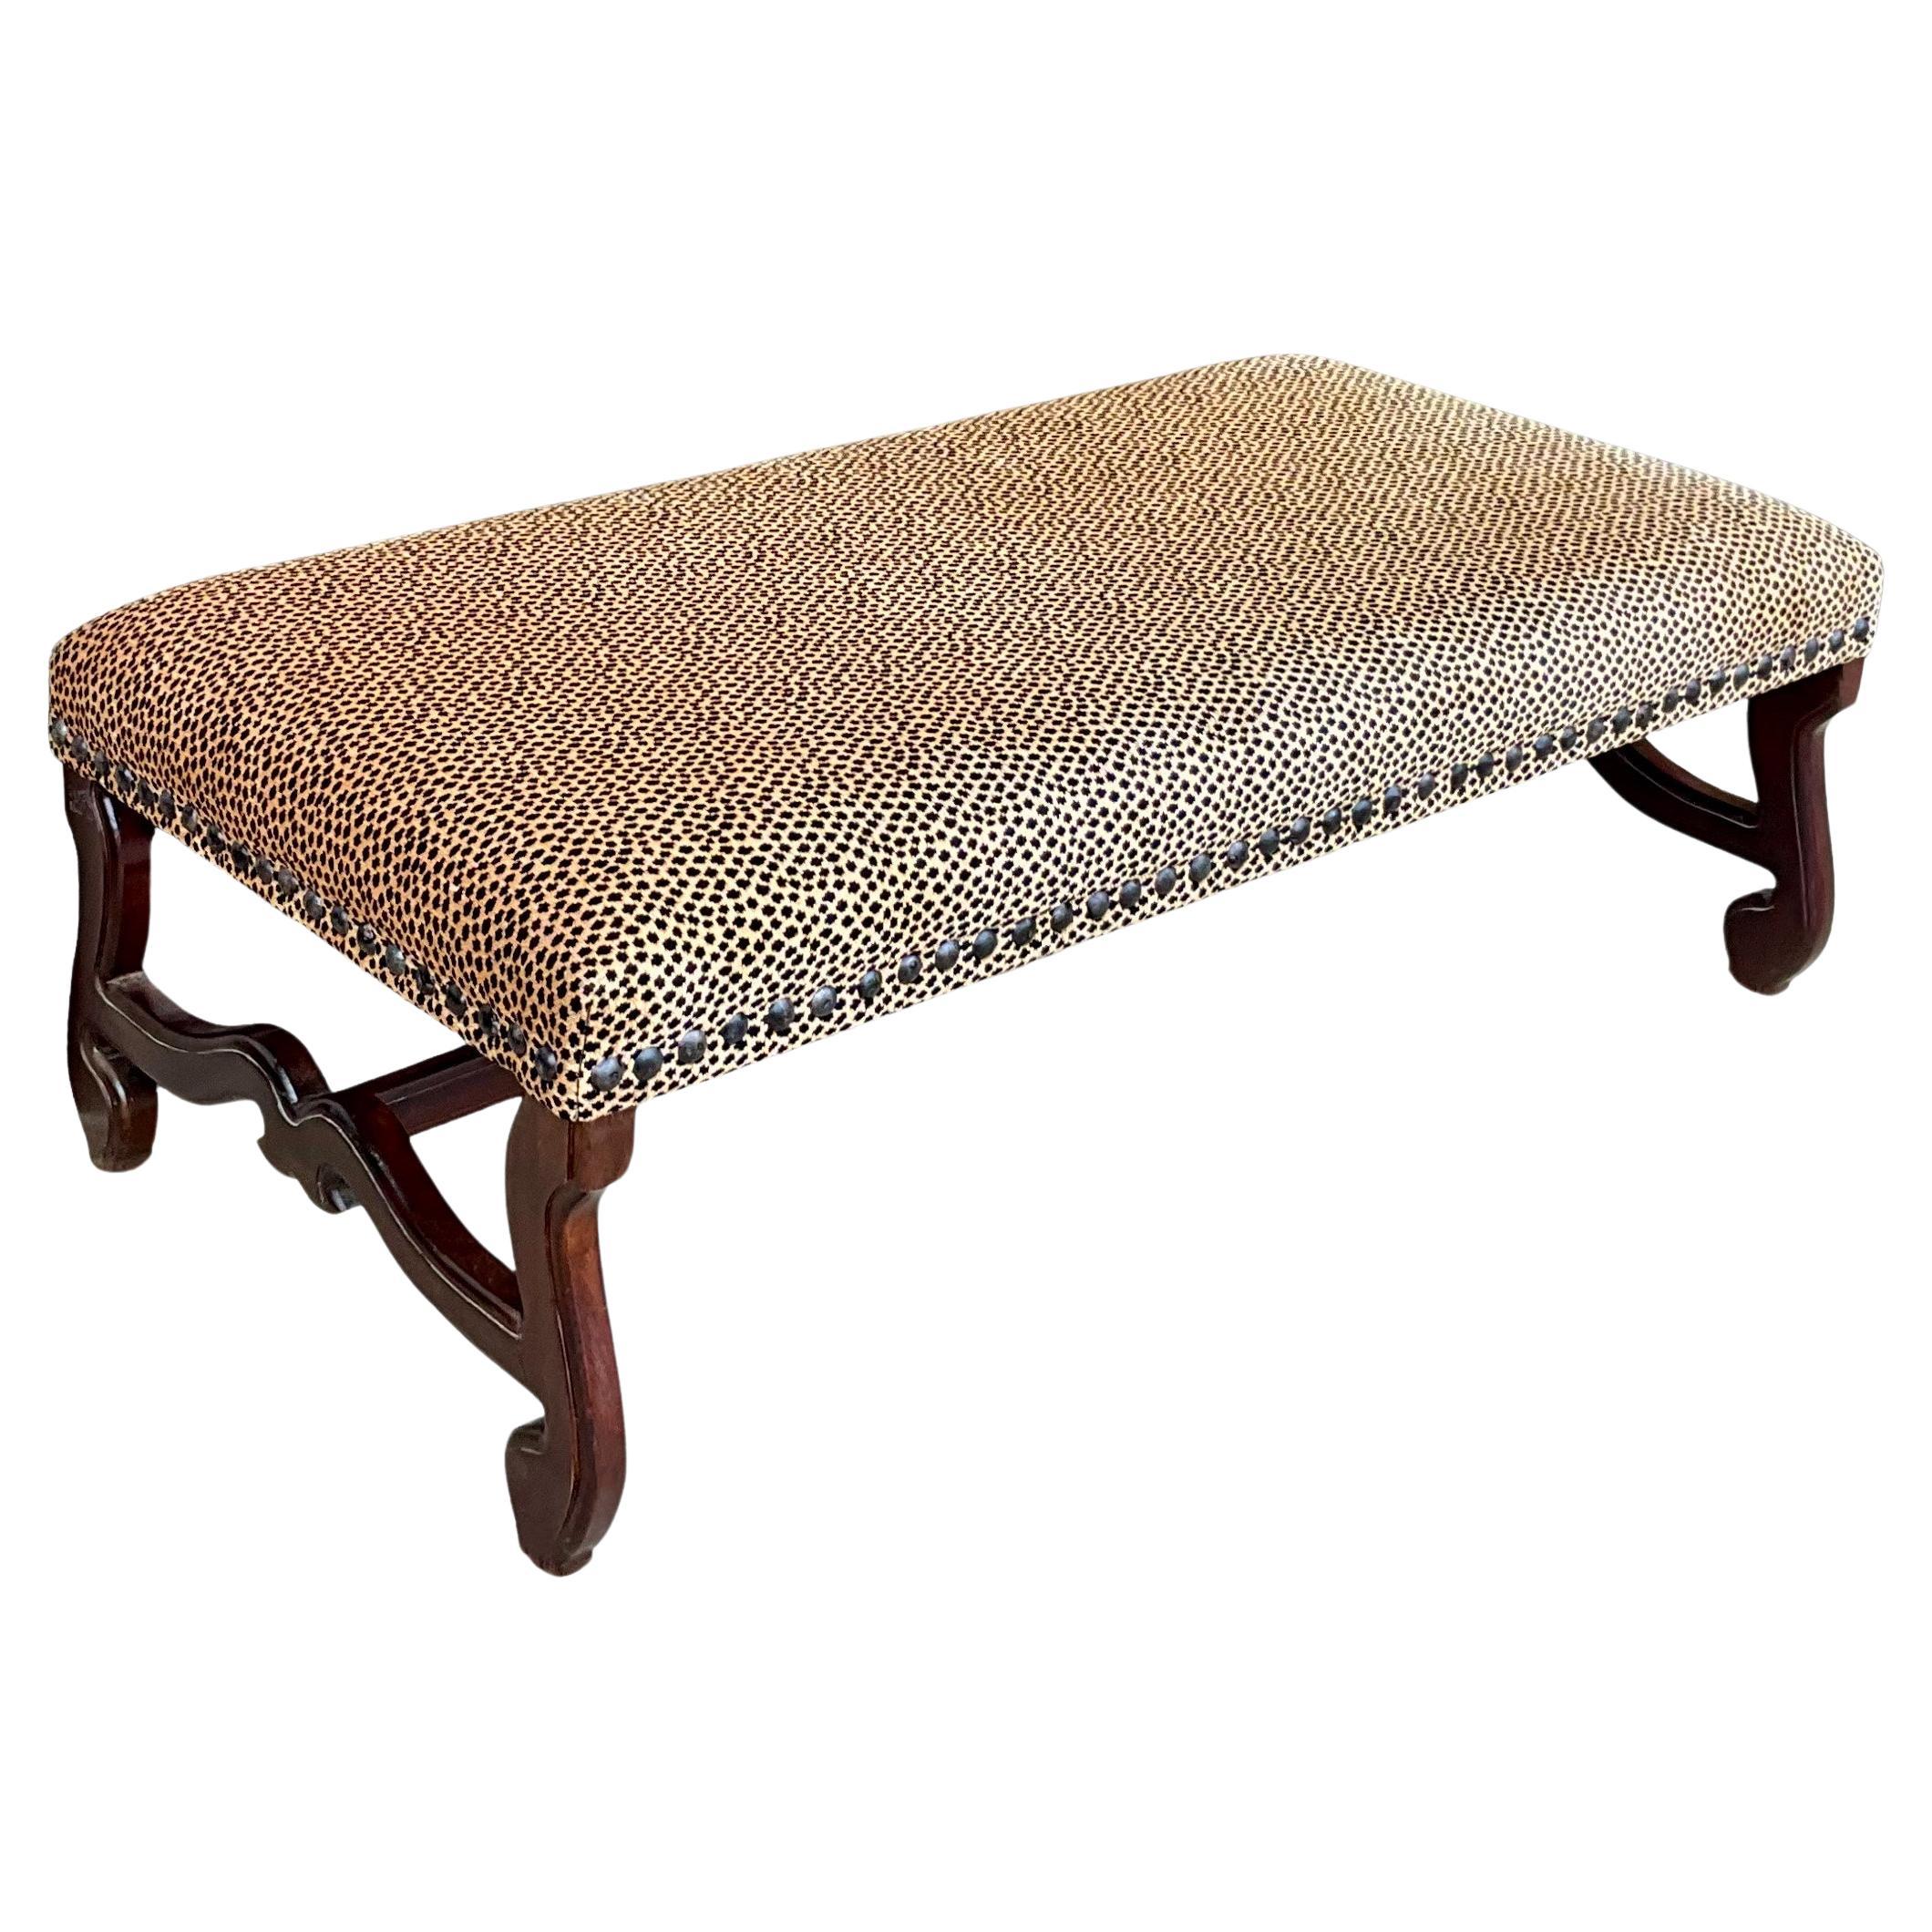 French Style Carved Oak Ottoman W/ Nailheads In Leopard Upholstery